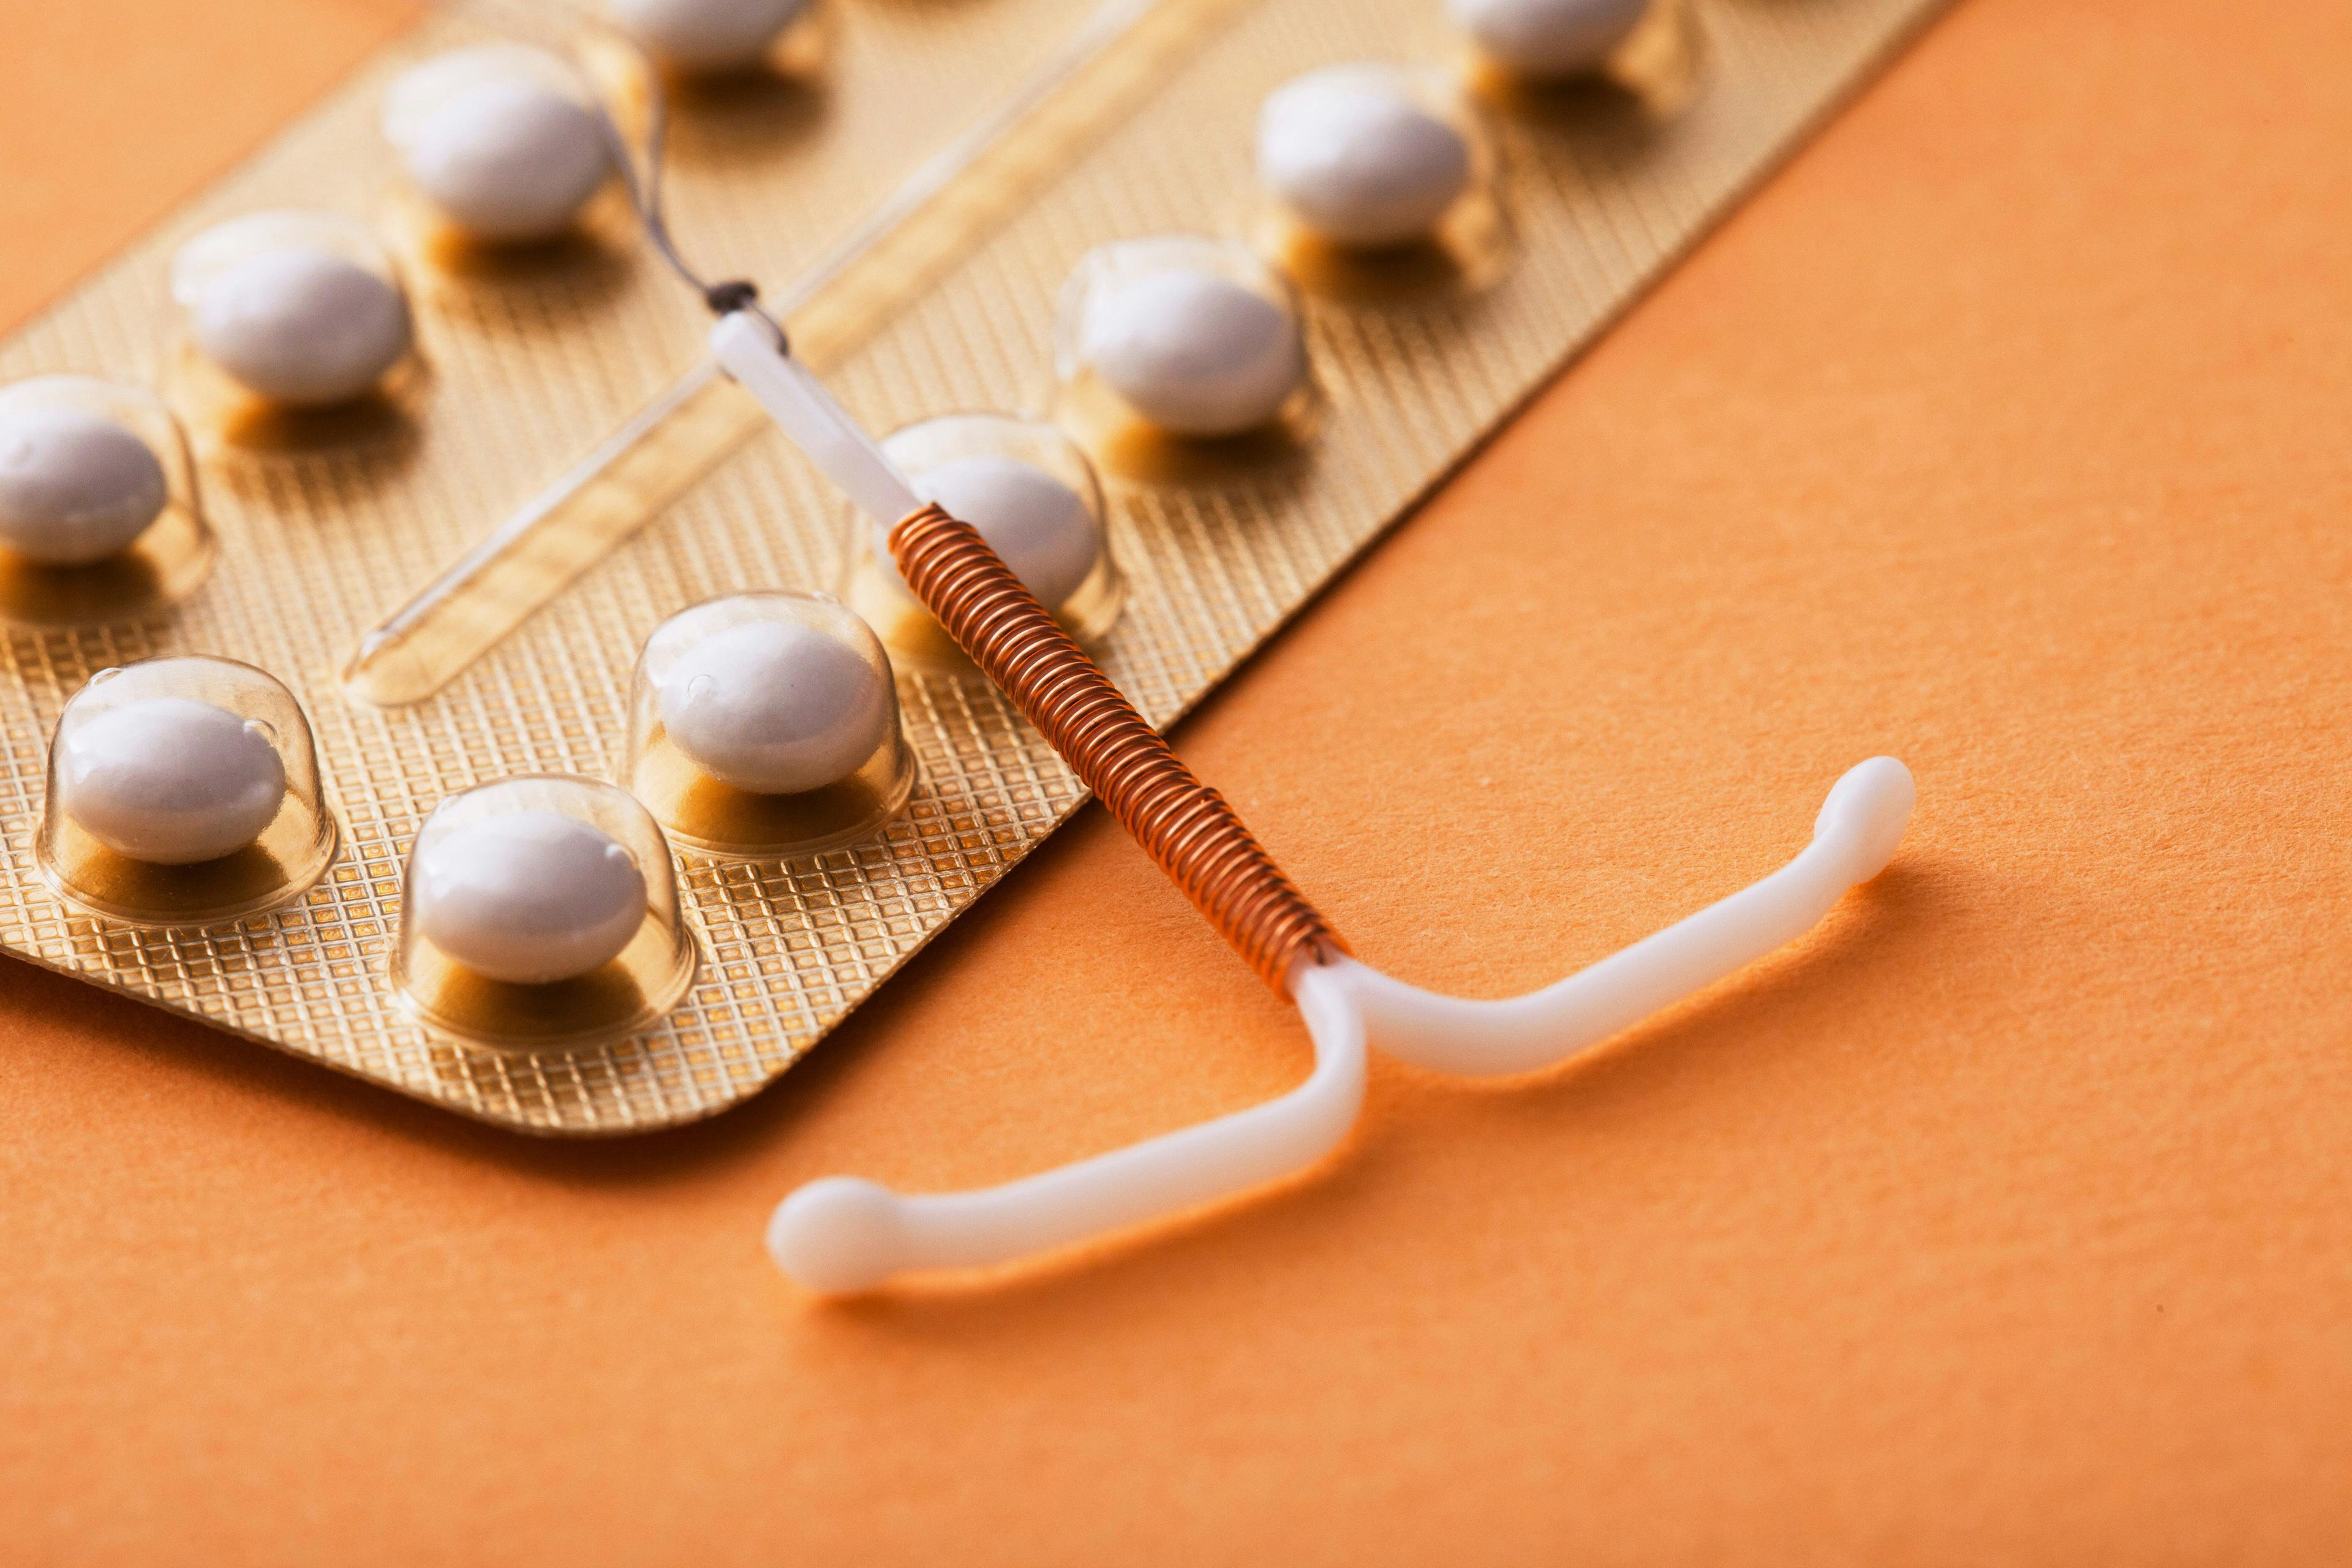 Contraception selection, efficacy, and risks